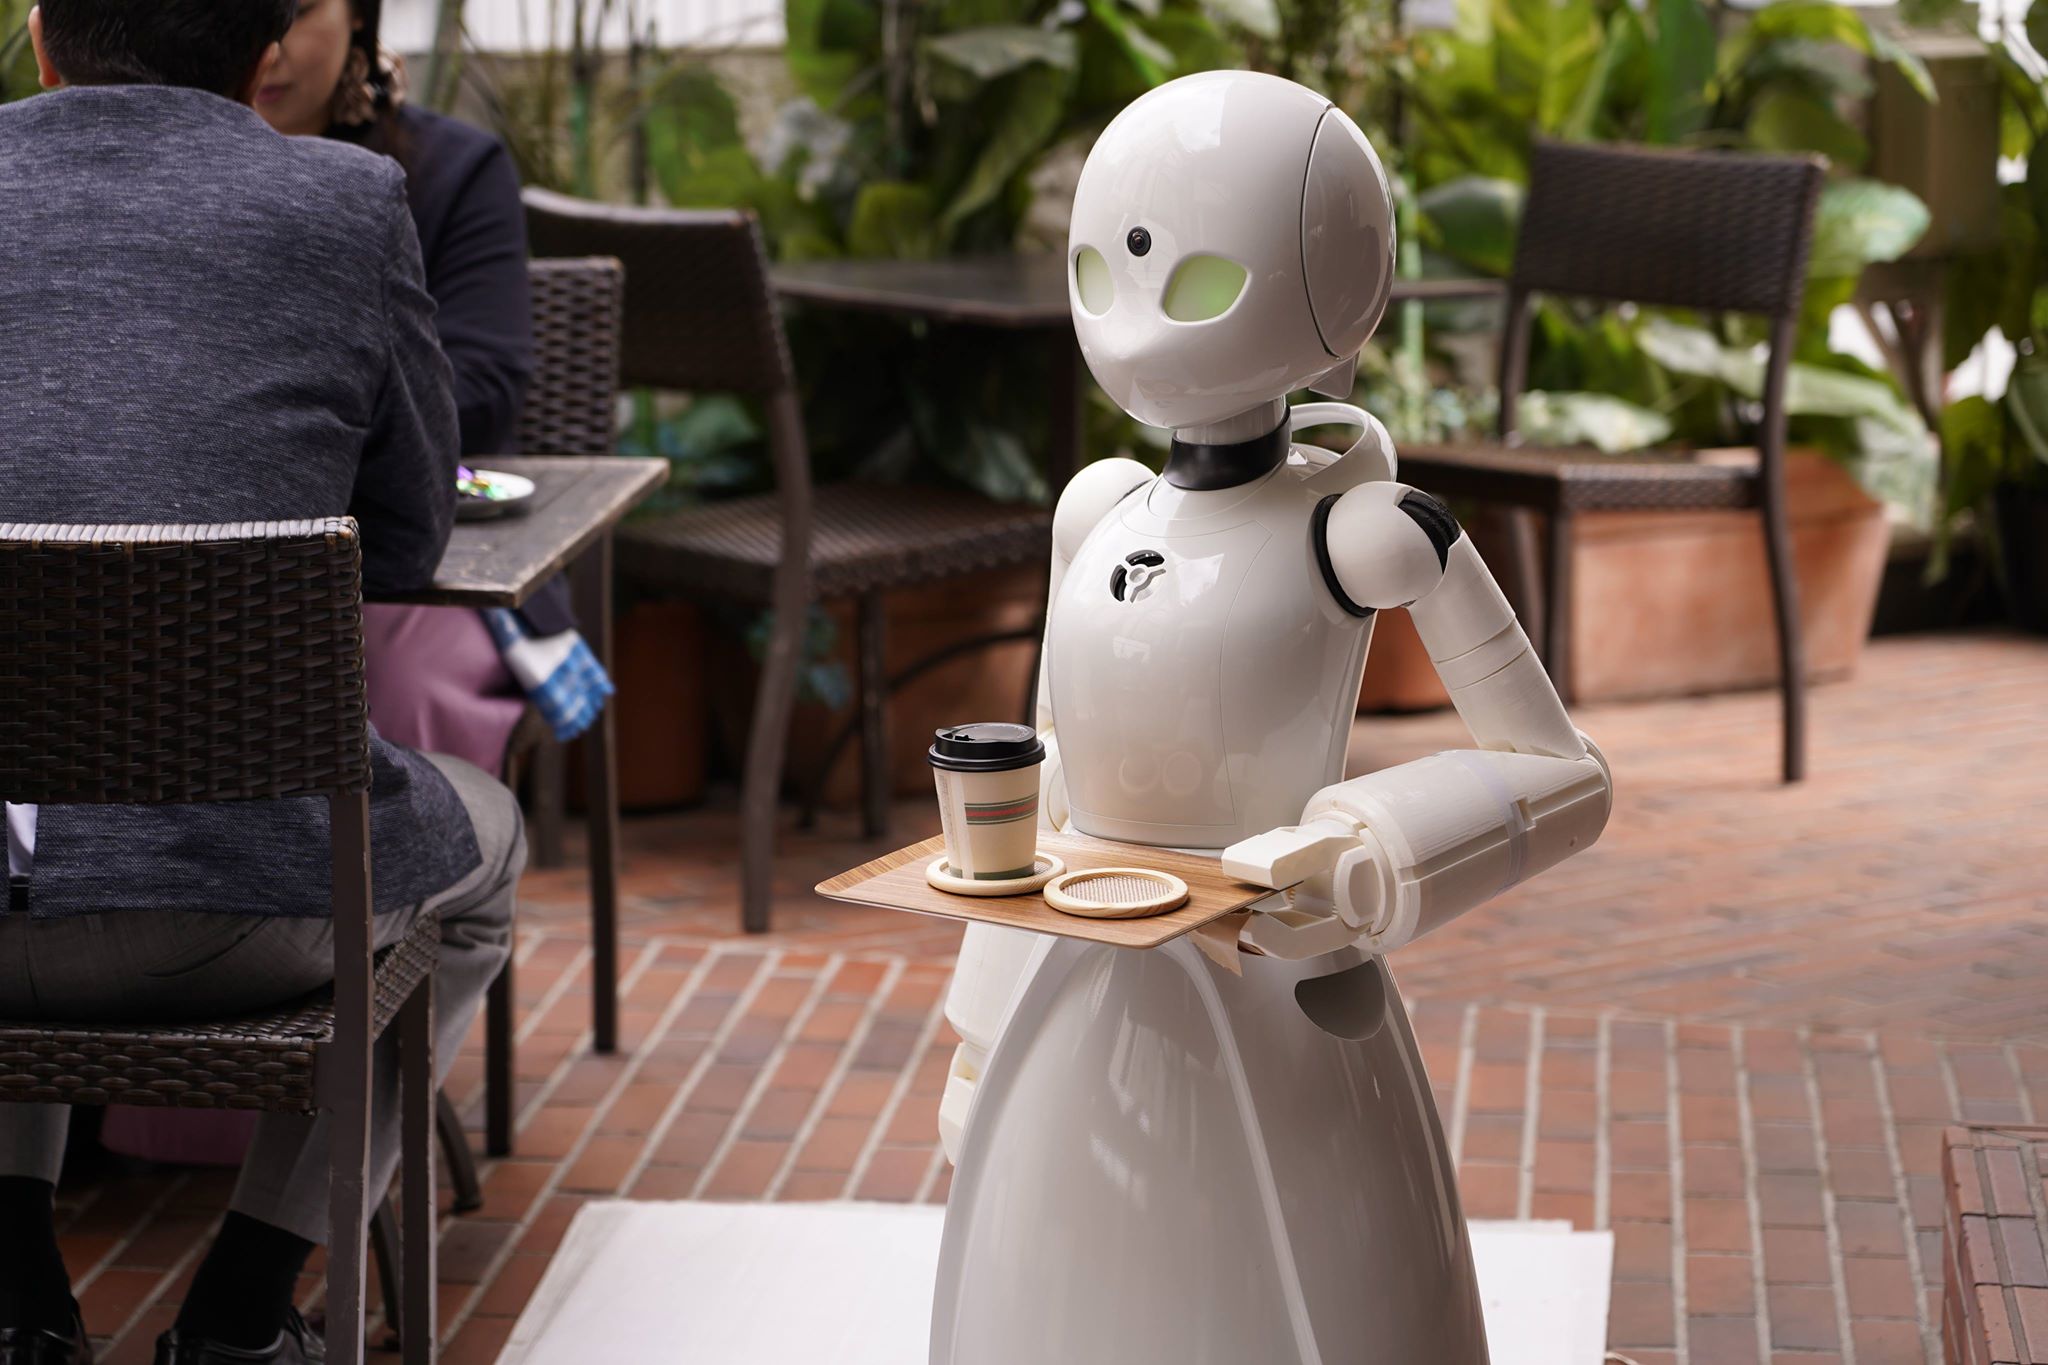 Cafe opens Tokyo staffed by robots controlled by | SoraNews24 -Japan News-